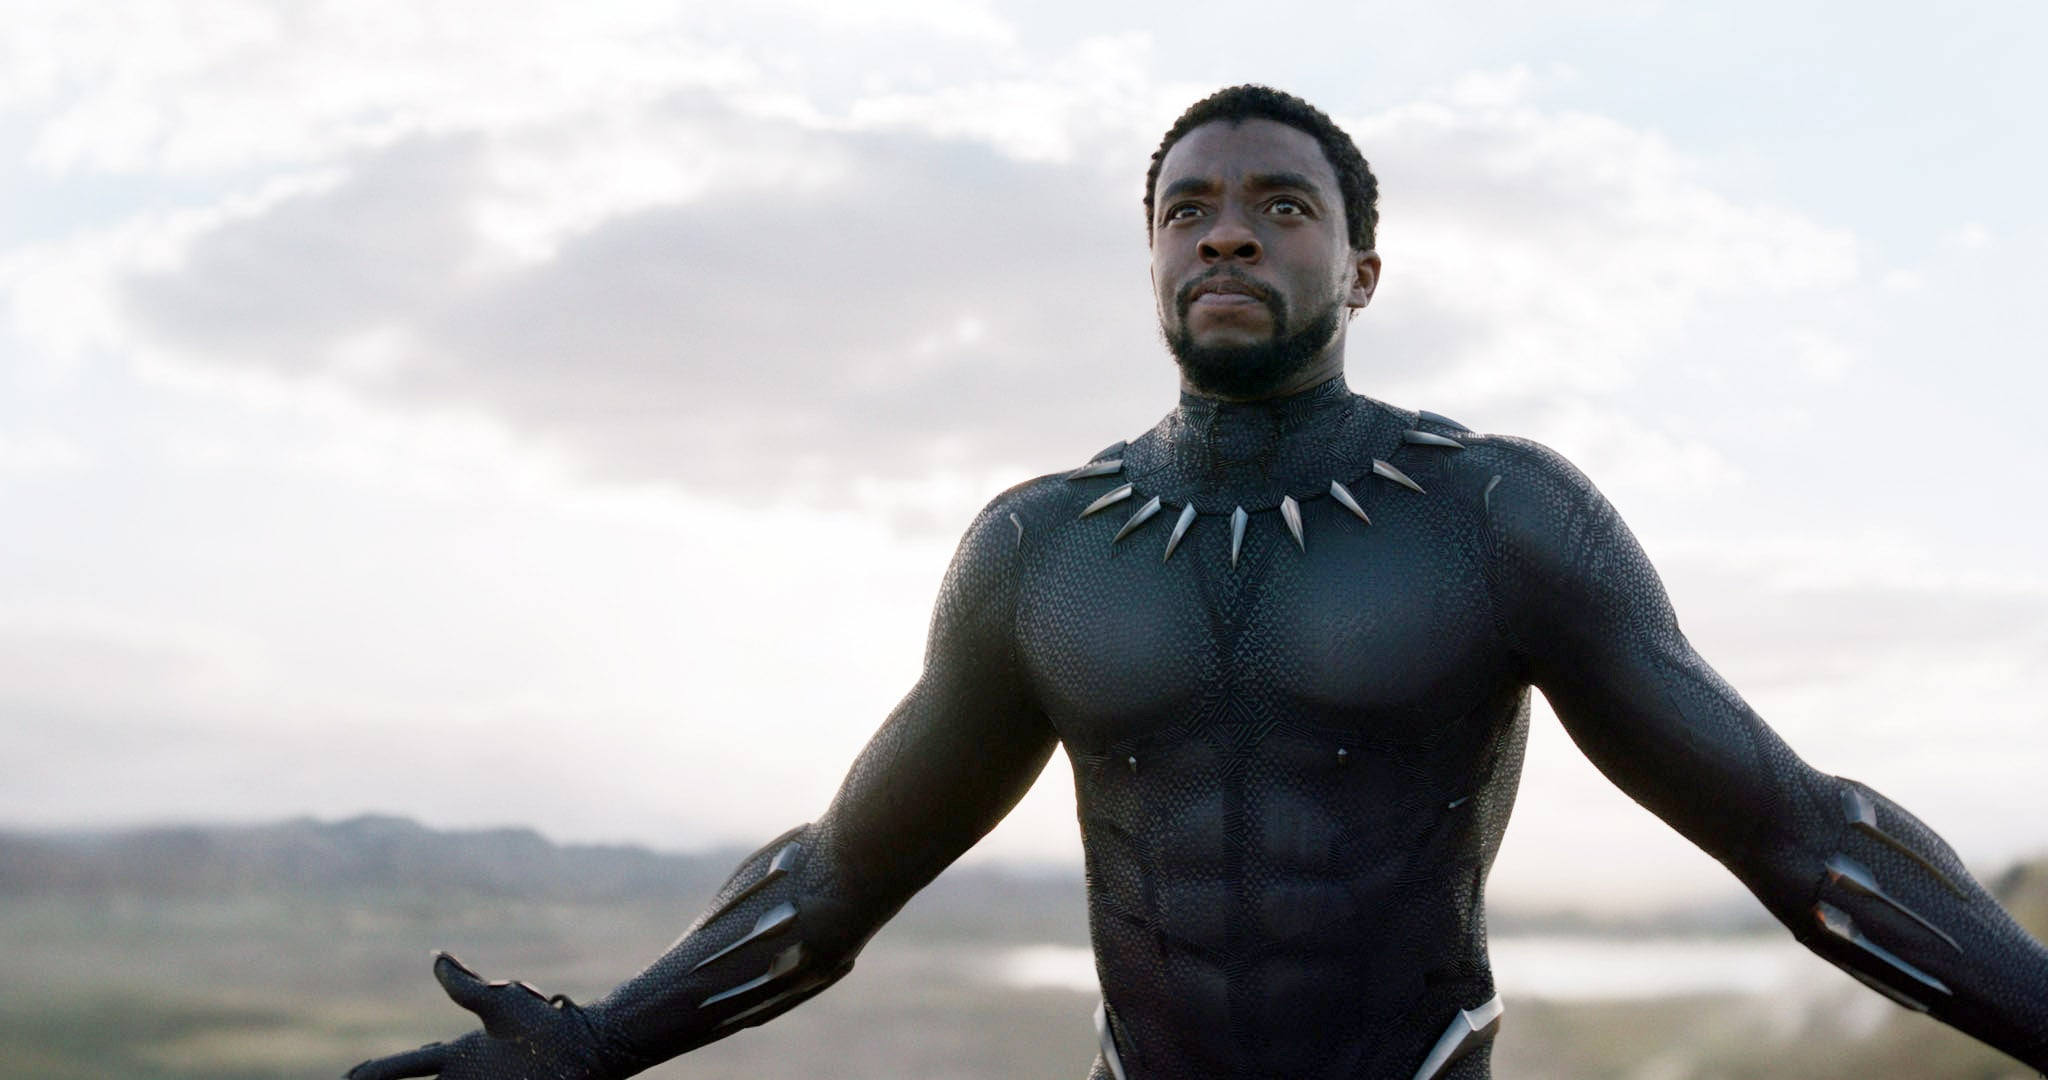 BLACK PANTHER, Chadwick Boseman, 2018.  Marvel /  Walt Disney Studios Motion Pictures /Courtesy Everett Collection